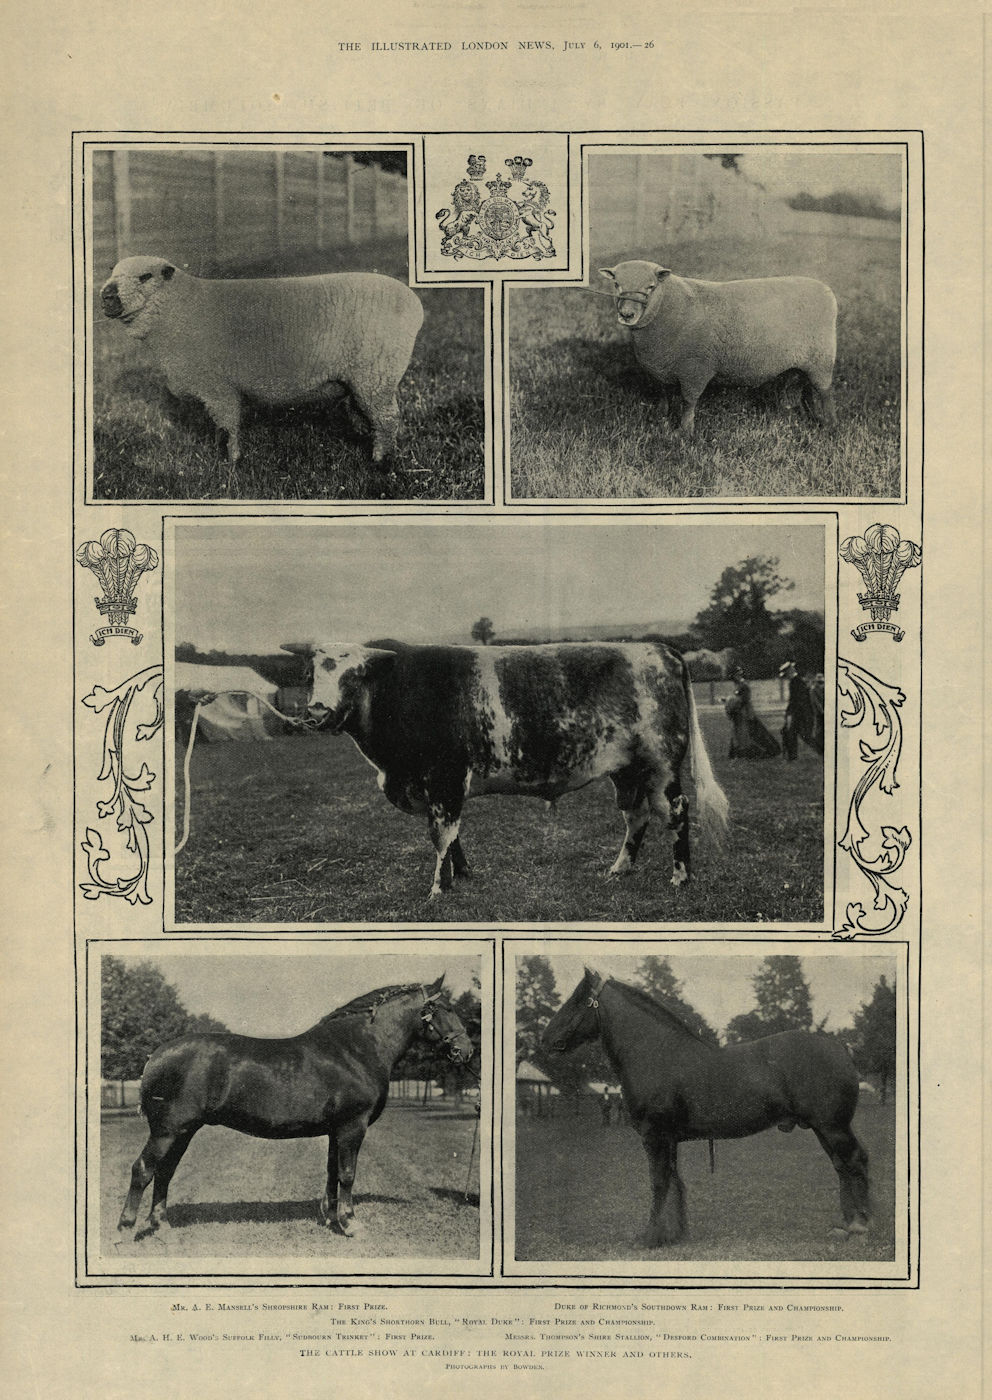 Cardiff cattle show prize winners. Shropshire Southdown rams Shorthorn bull 1901